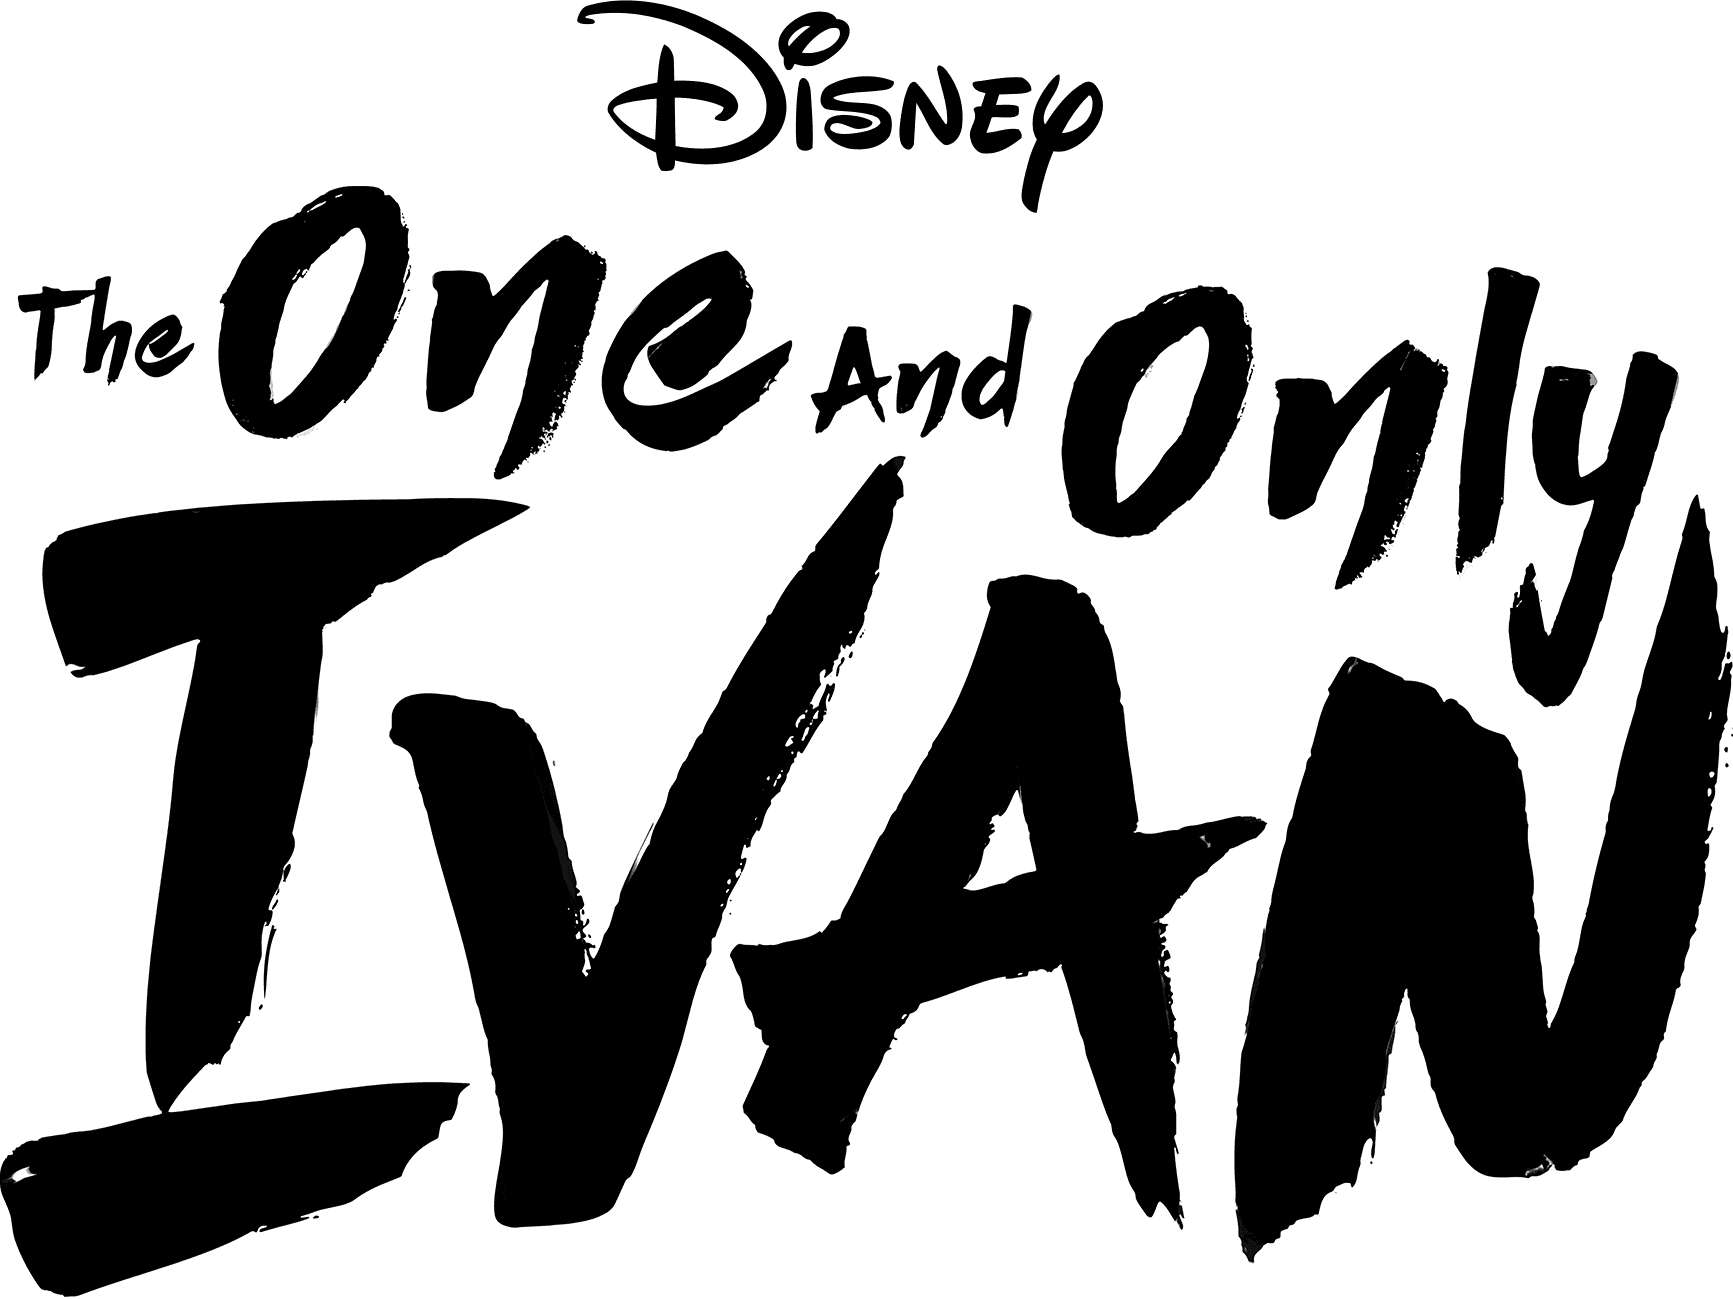 The One and Only Ivan logo